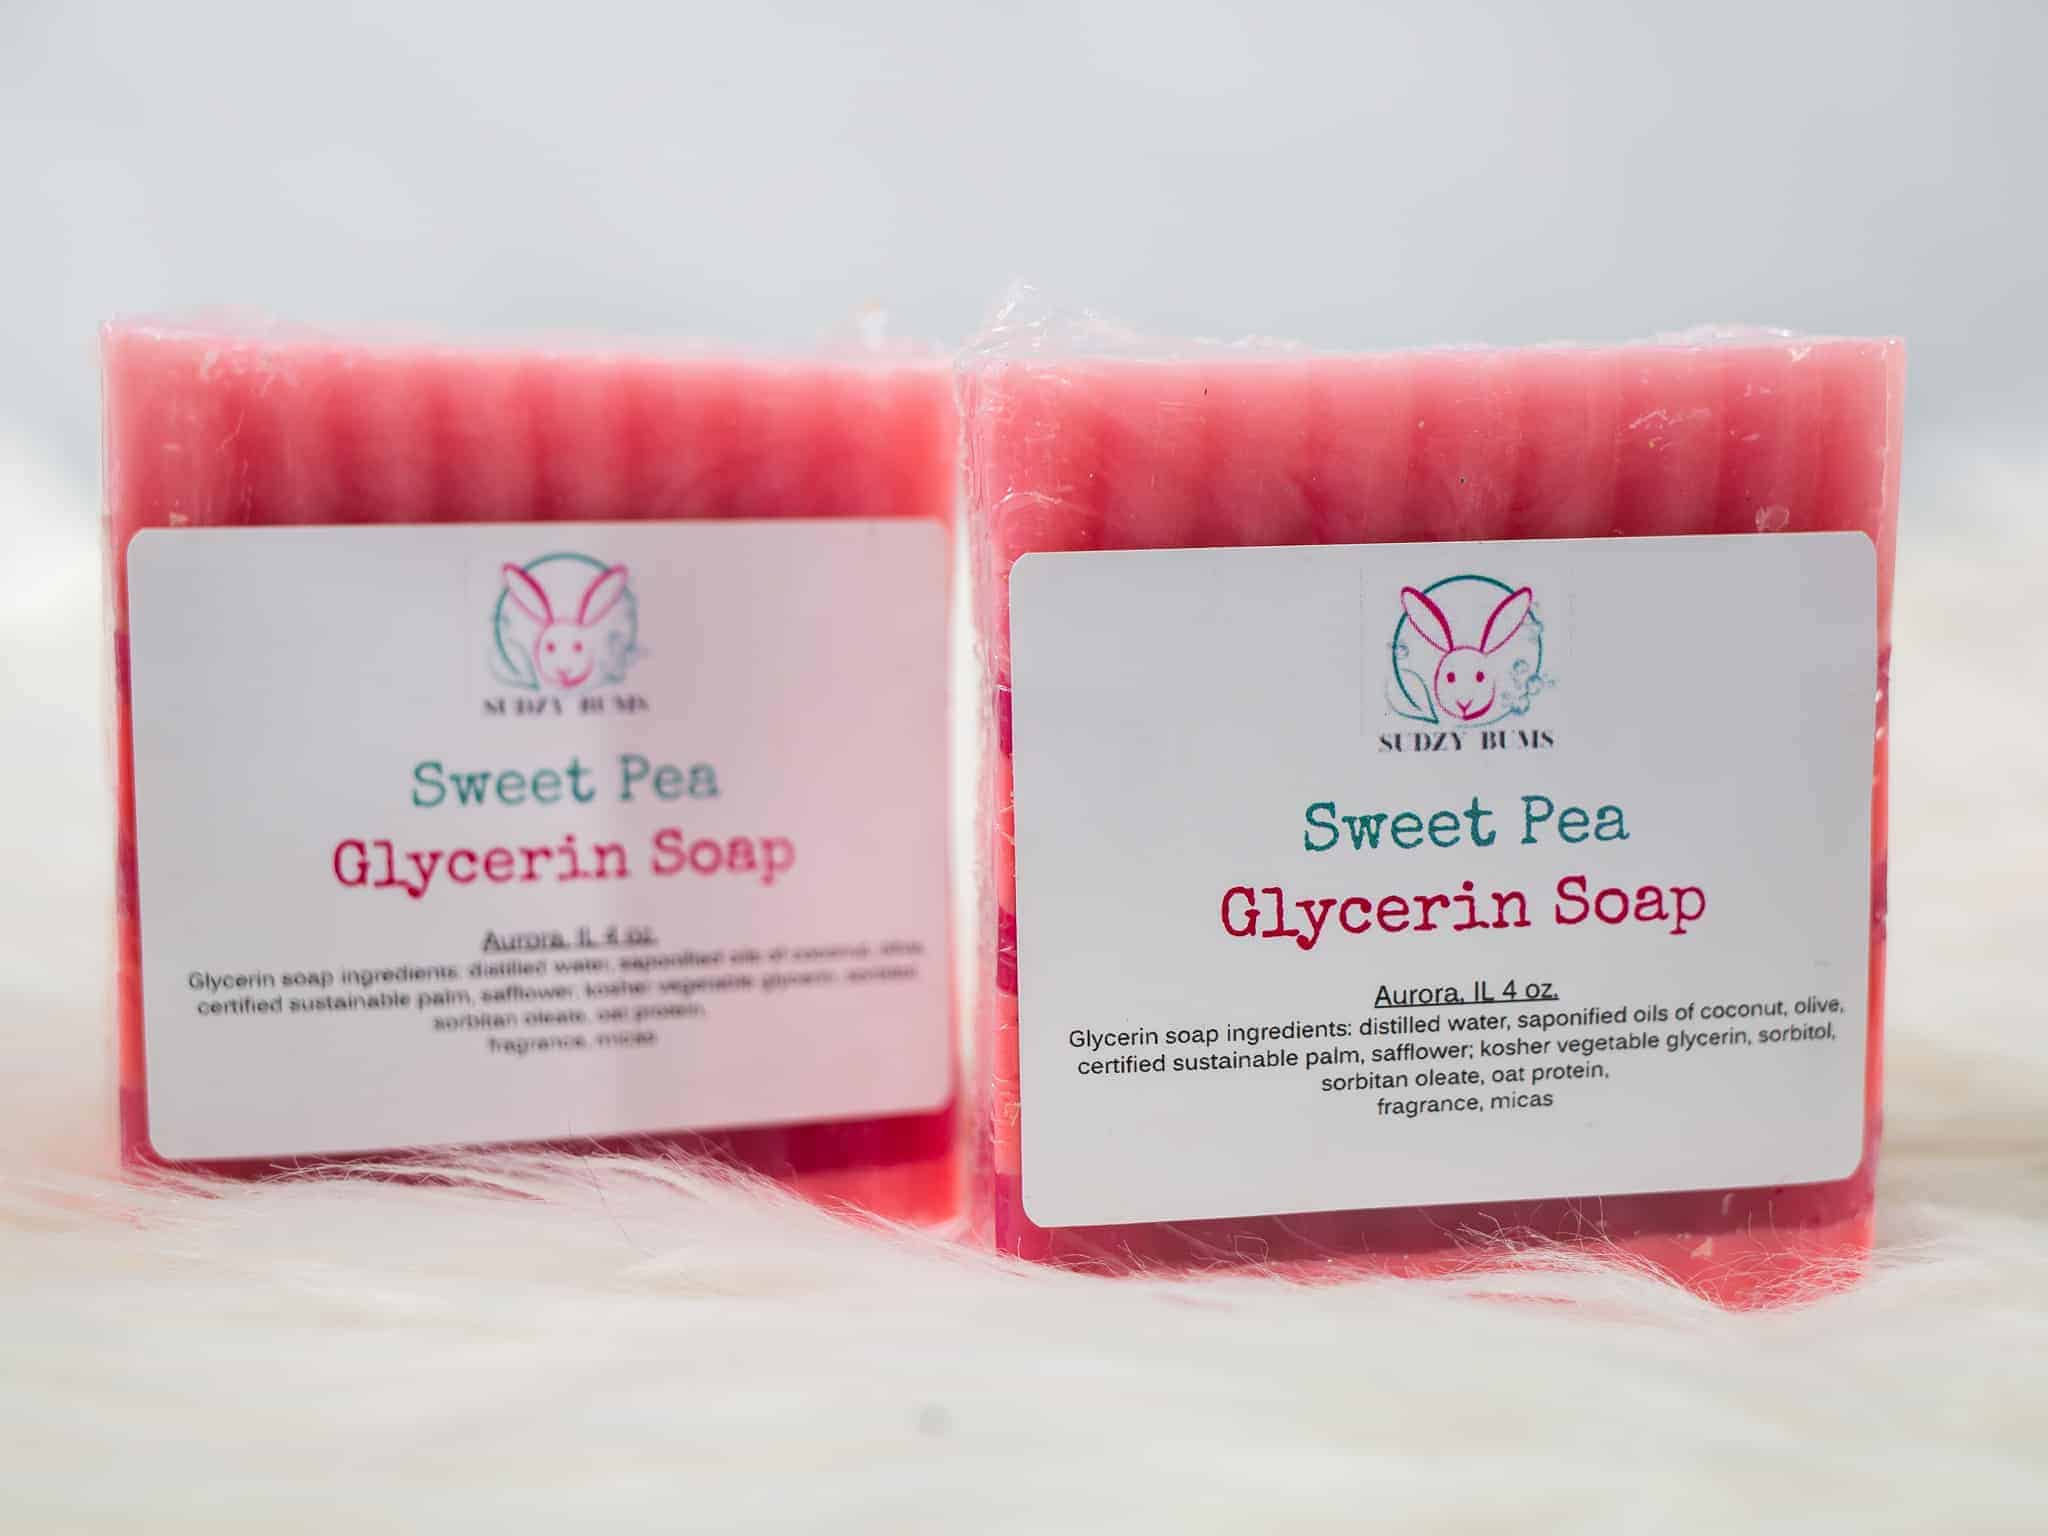 This Sweet Pea Vegan Glycerin soap is made with love by Sudzy Bums! Shop more unique gift ideas today with Spots Initiatives, the best way to support creators.